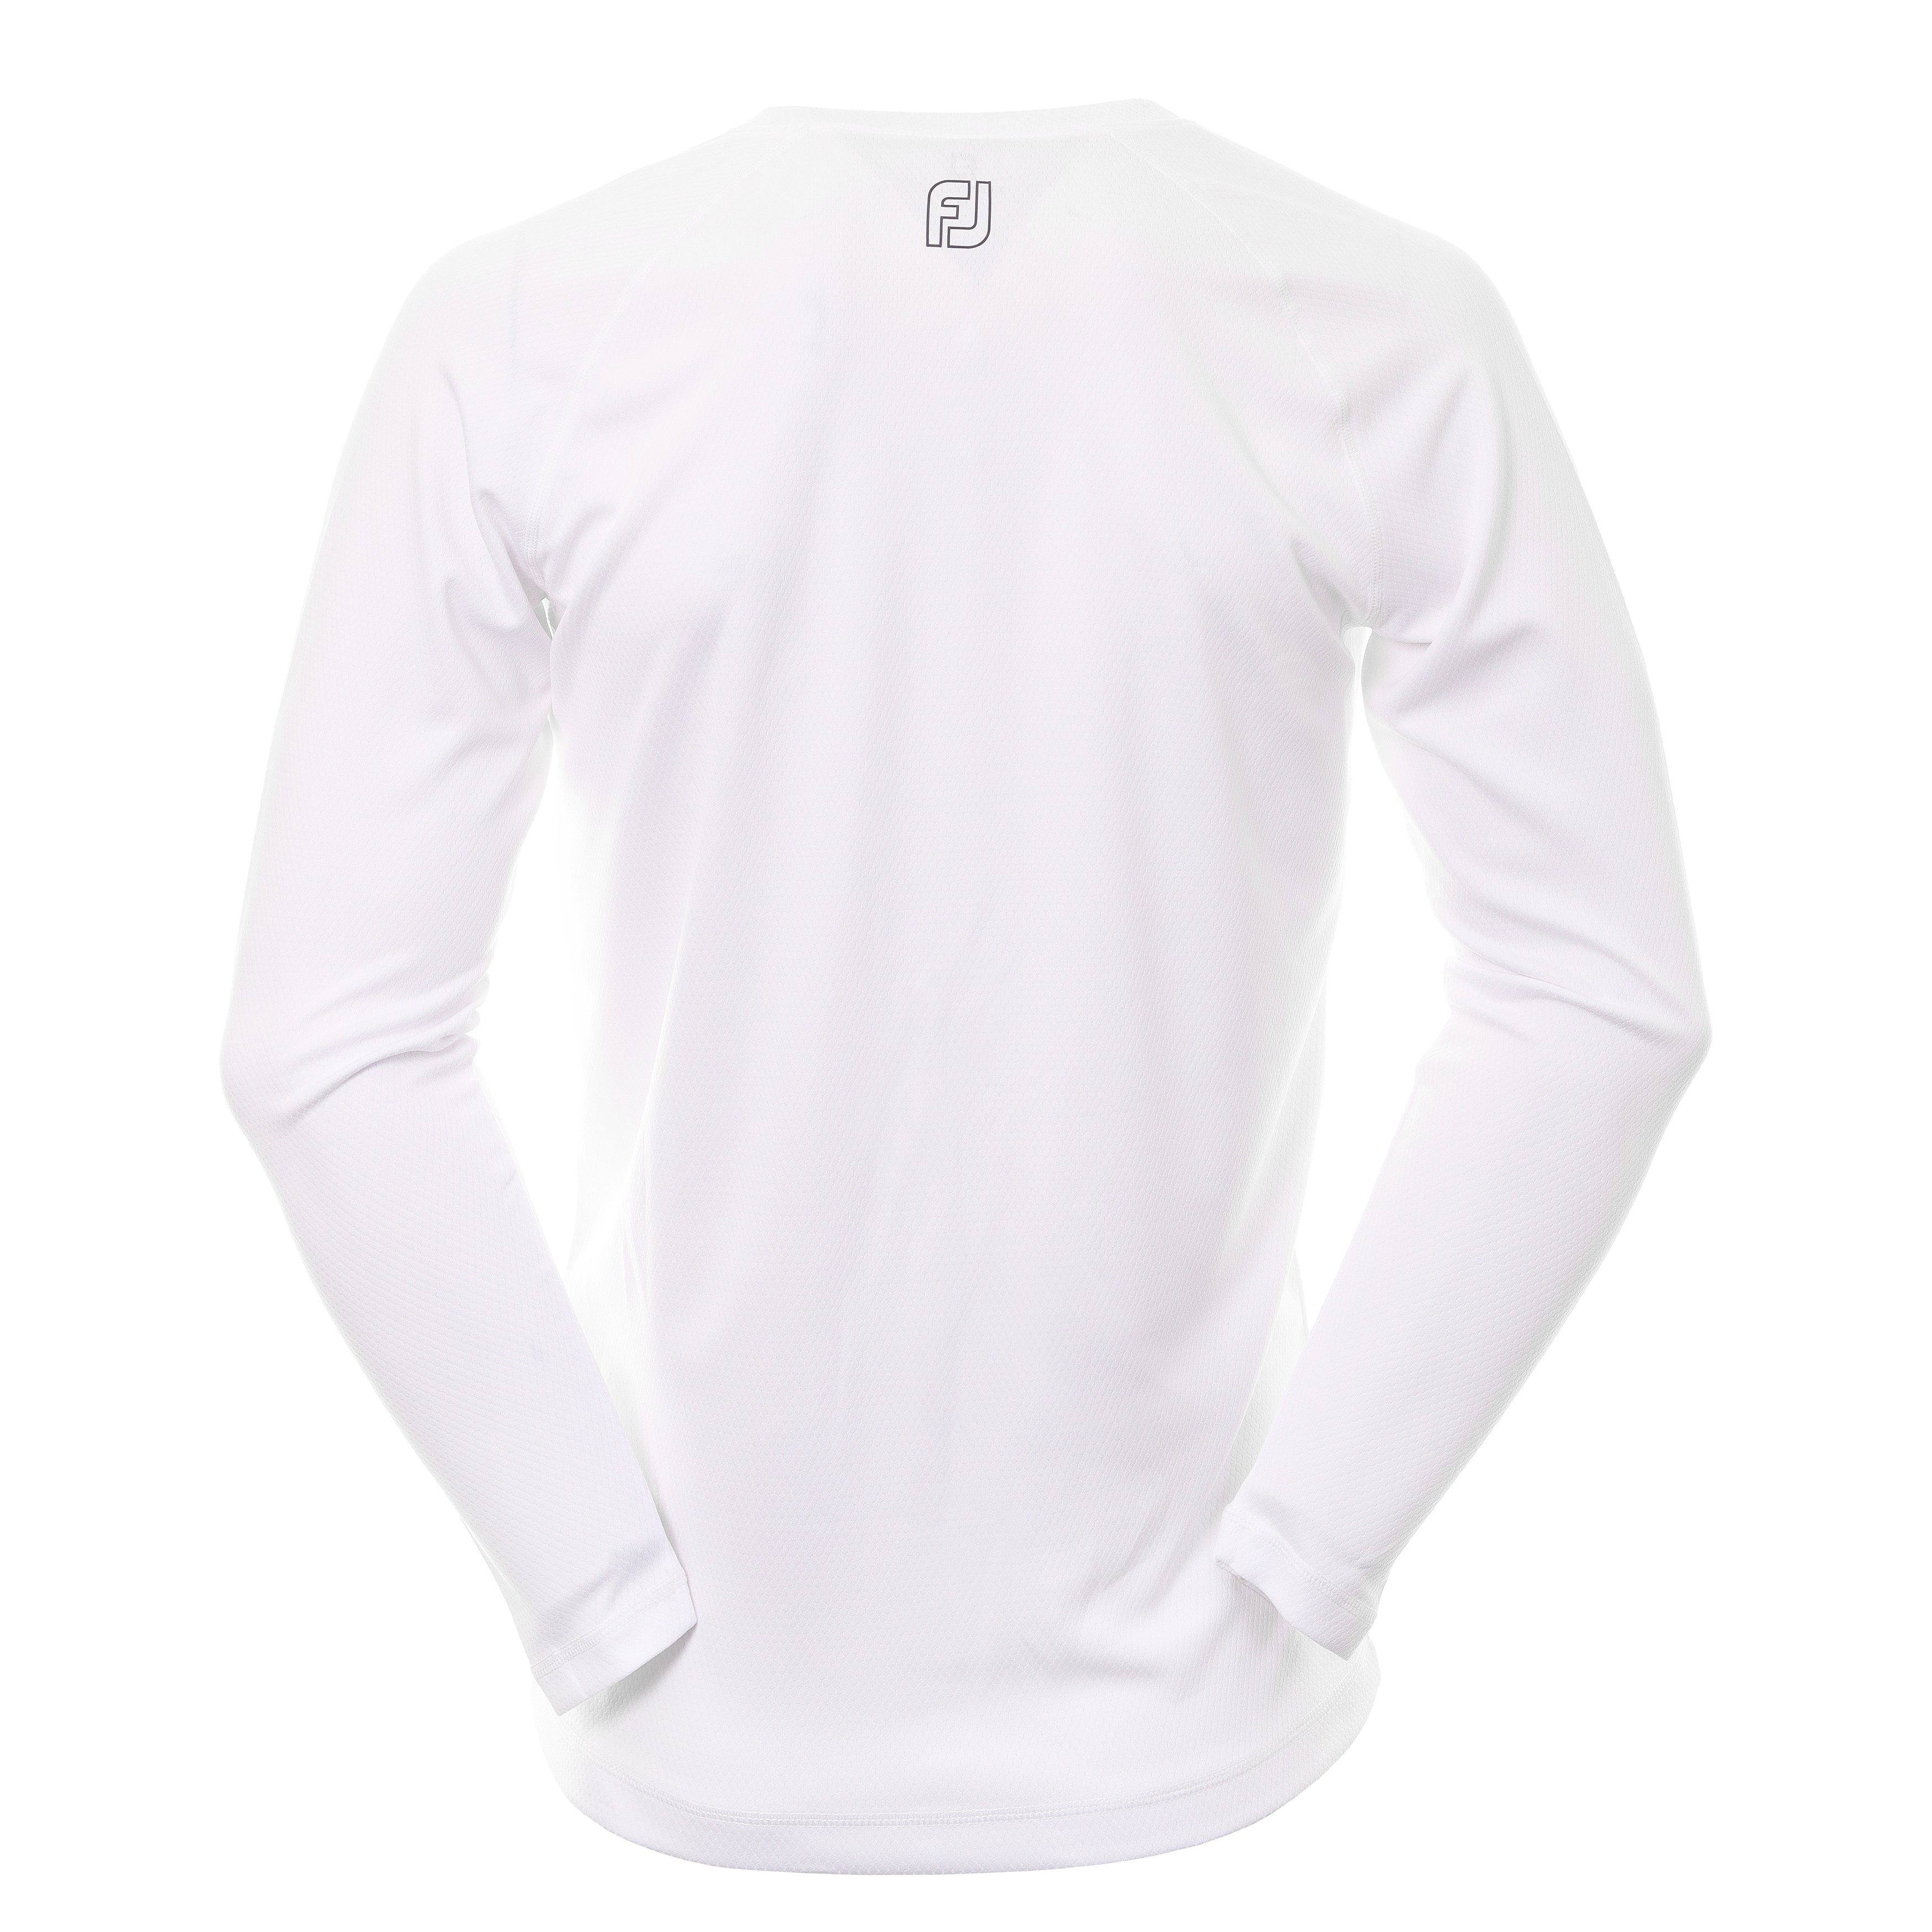 FootJoy ThermoSeries Baselayer 88816 White | Function18